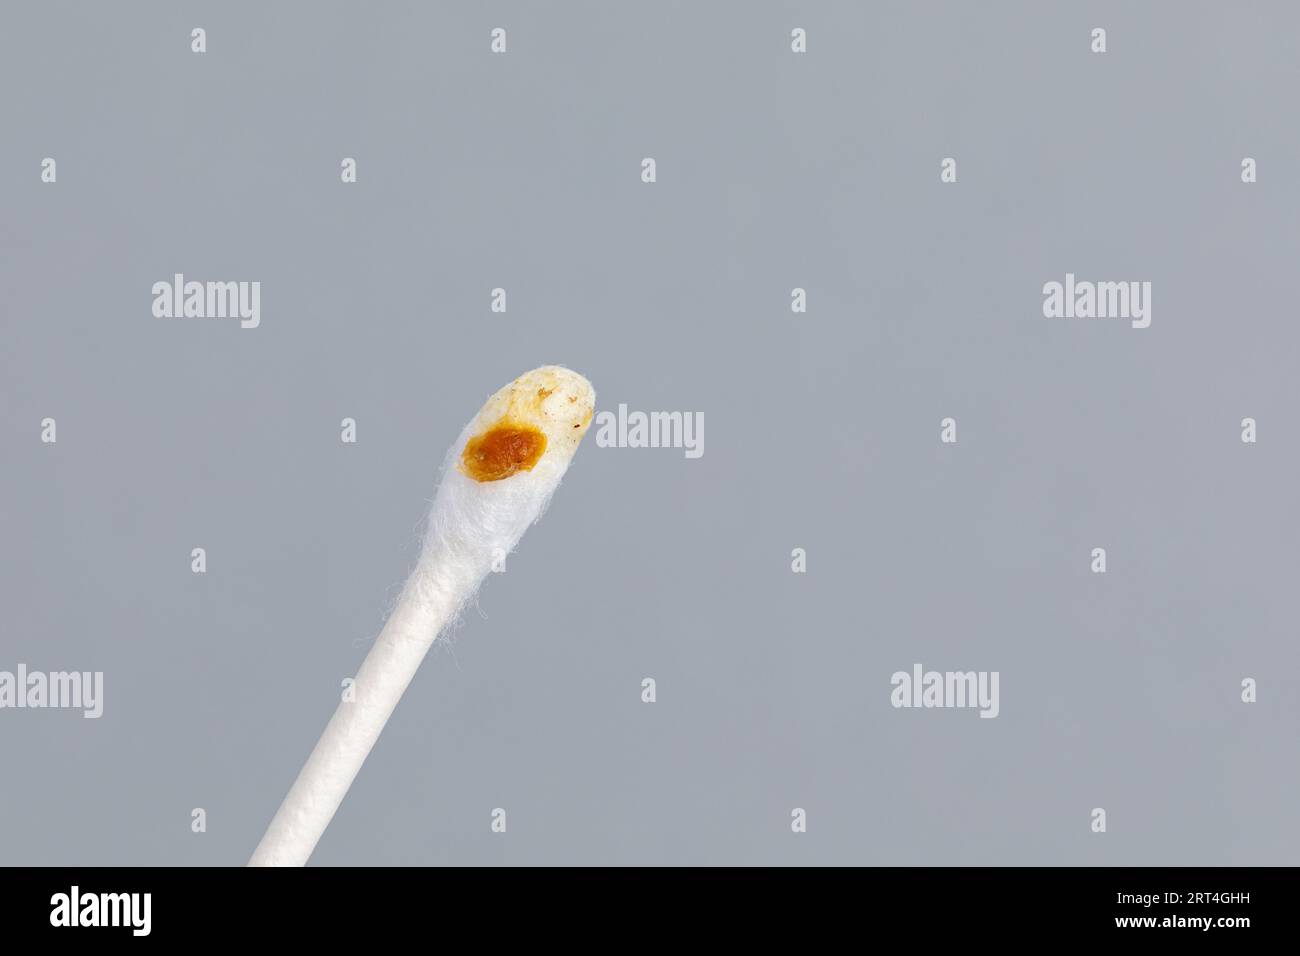 Earwax on cotton swab. Ear health, problems, cleaning and hearing loss concept. Stock Photo